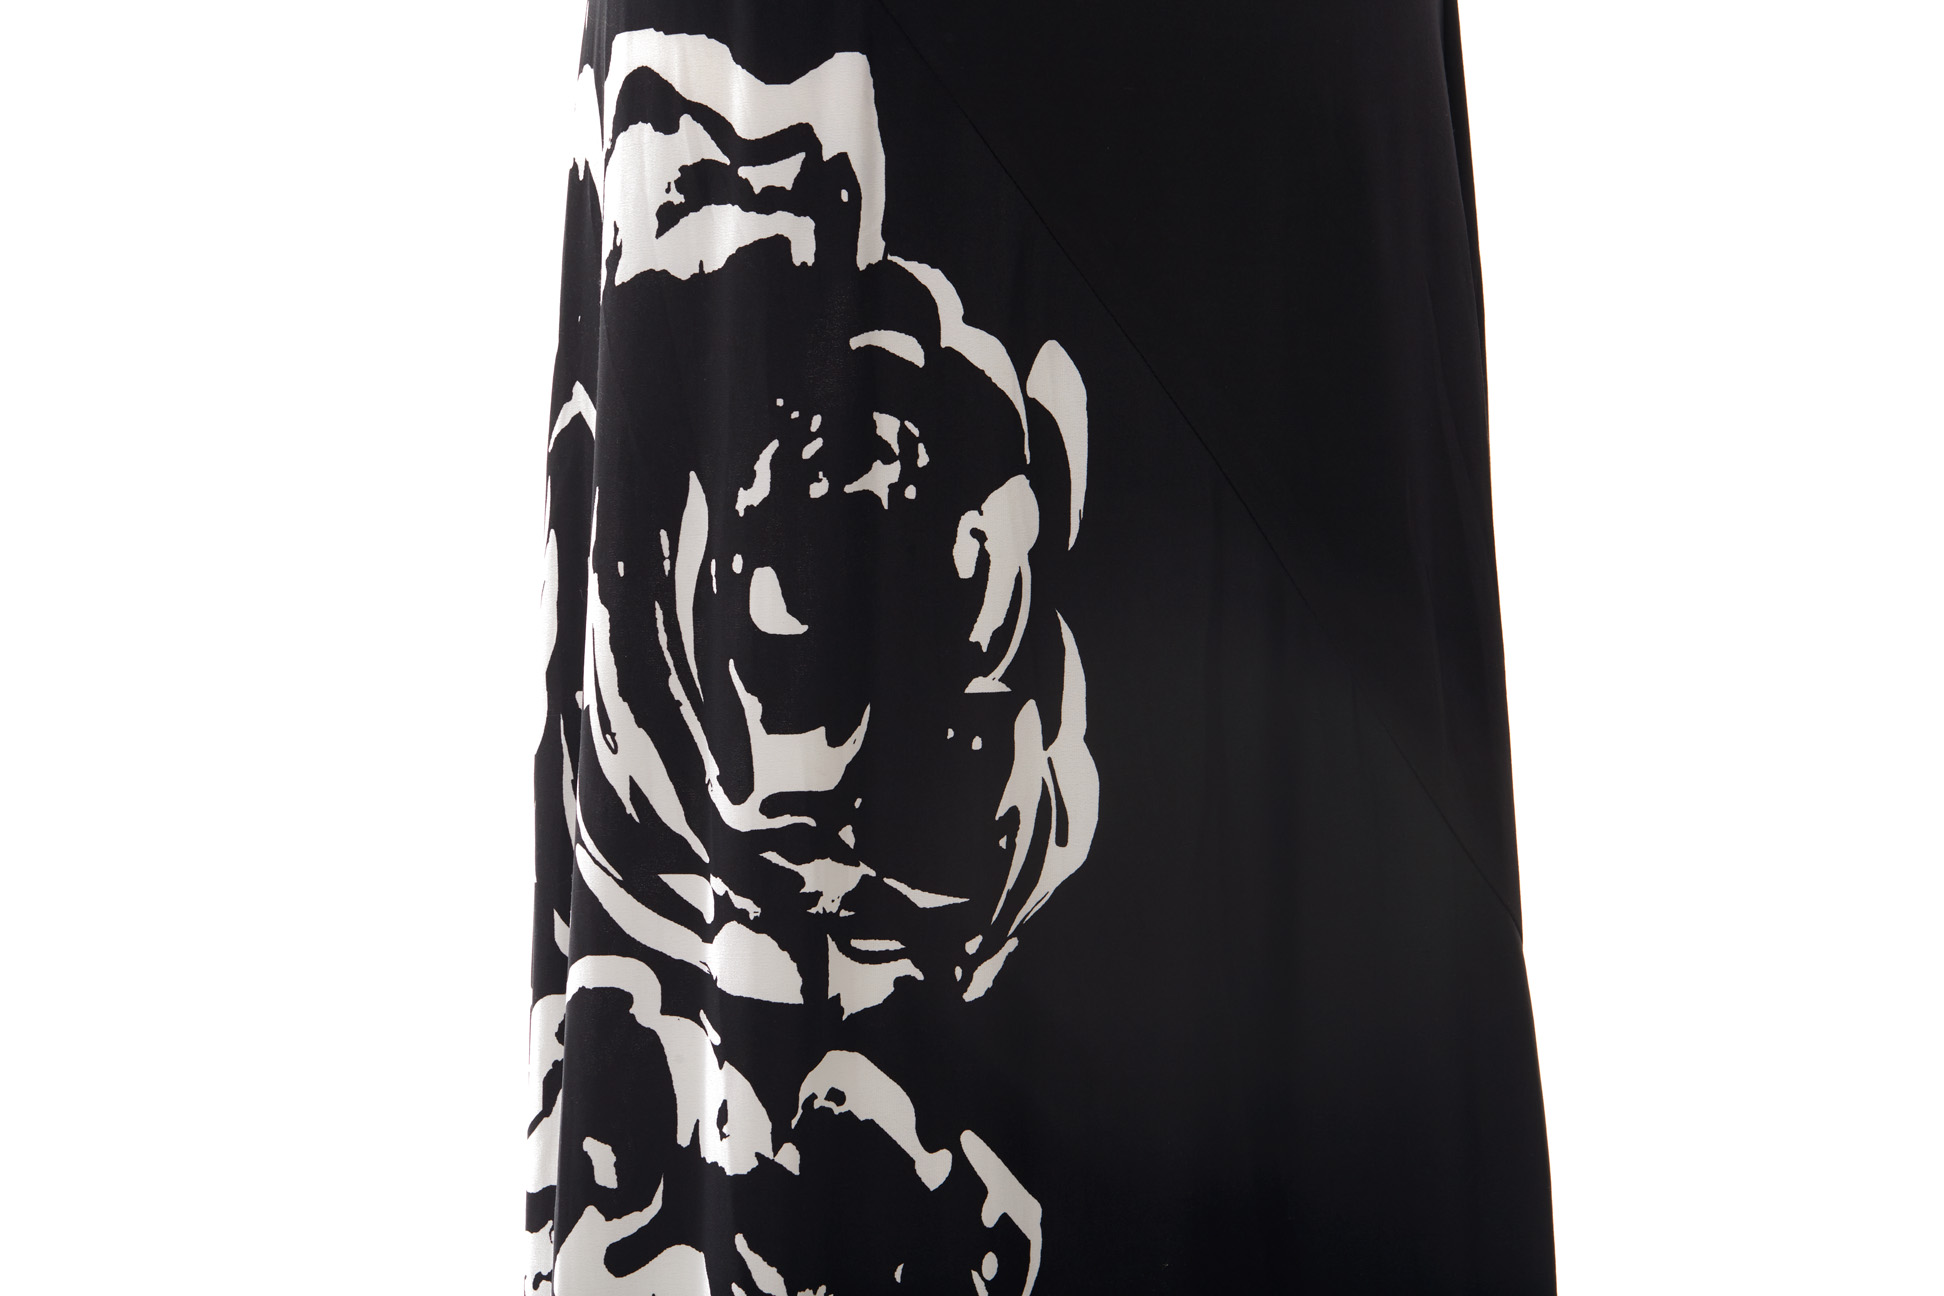 A BLACK LABEL BY CHICOS LONG BLACK DRESS - Image 2 of 3